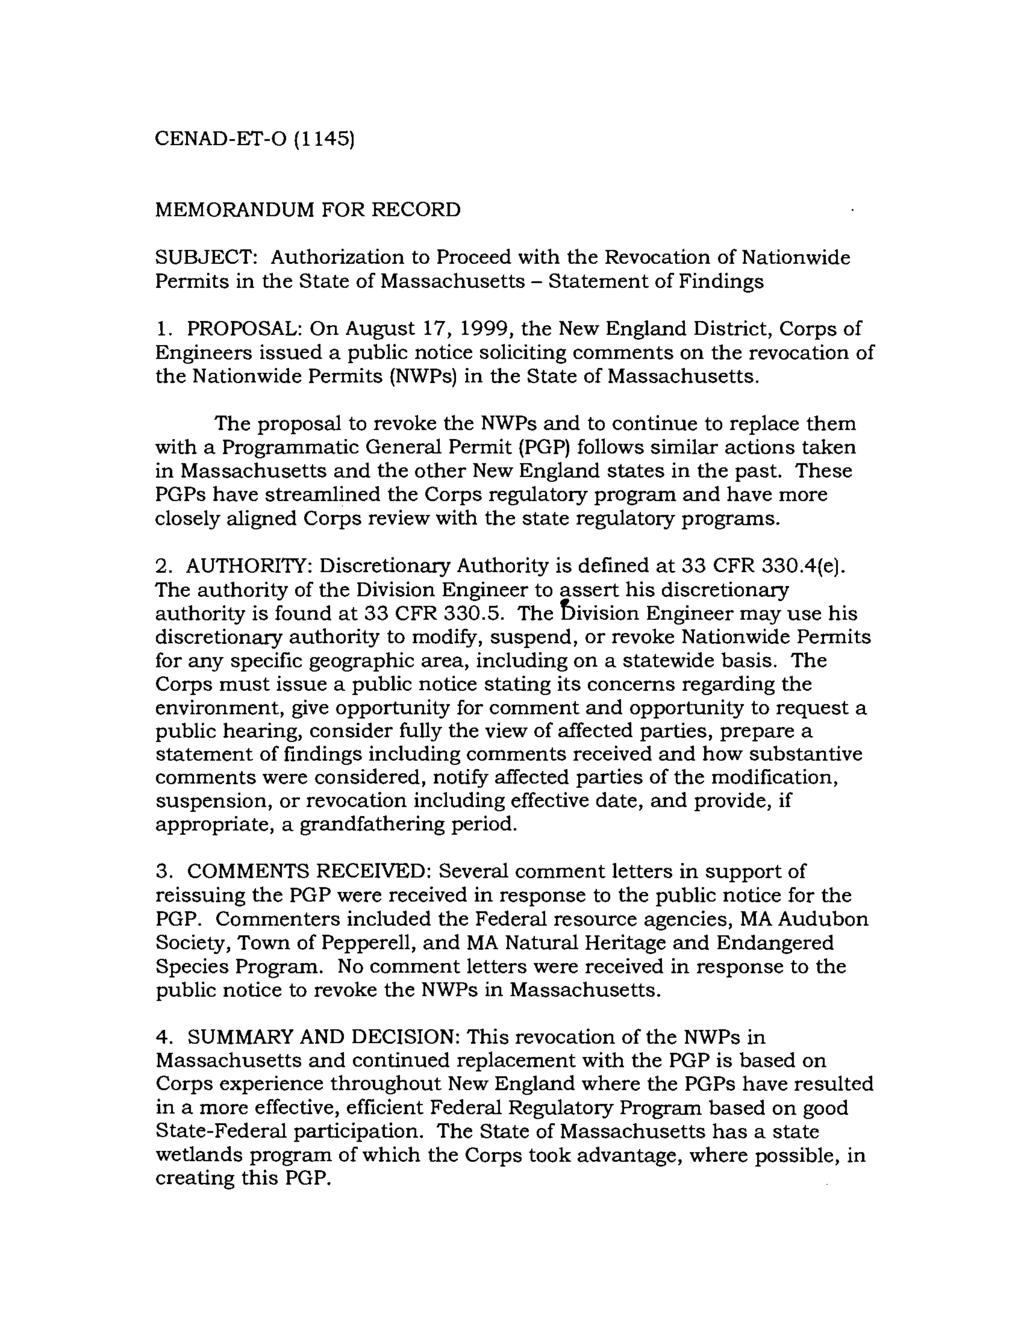 CENAD-ET-0 (1145) MEMORANDUM FOR RECORD SUBJECT: Authorization to Proceed with the Revocation of Nationwide Permits in the State of Massachusetts - Statement of Findings 1.